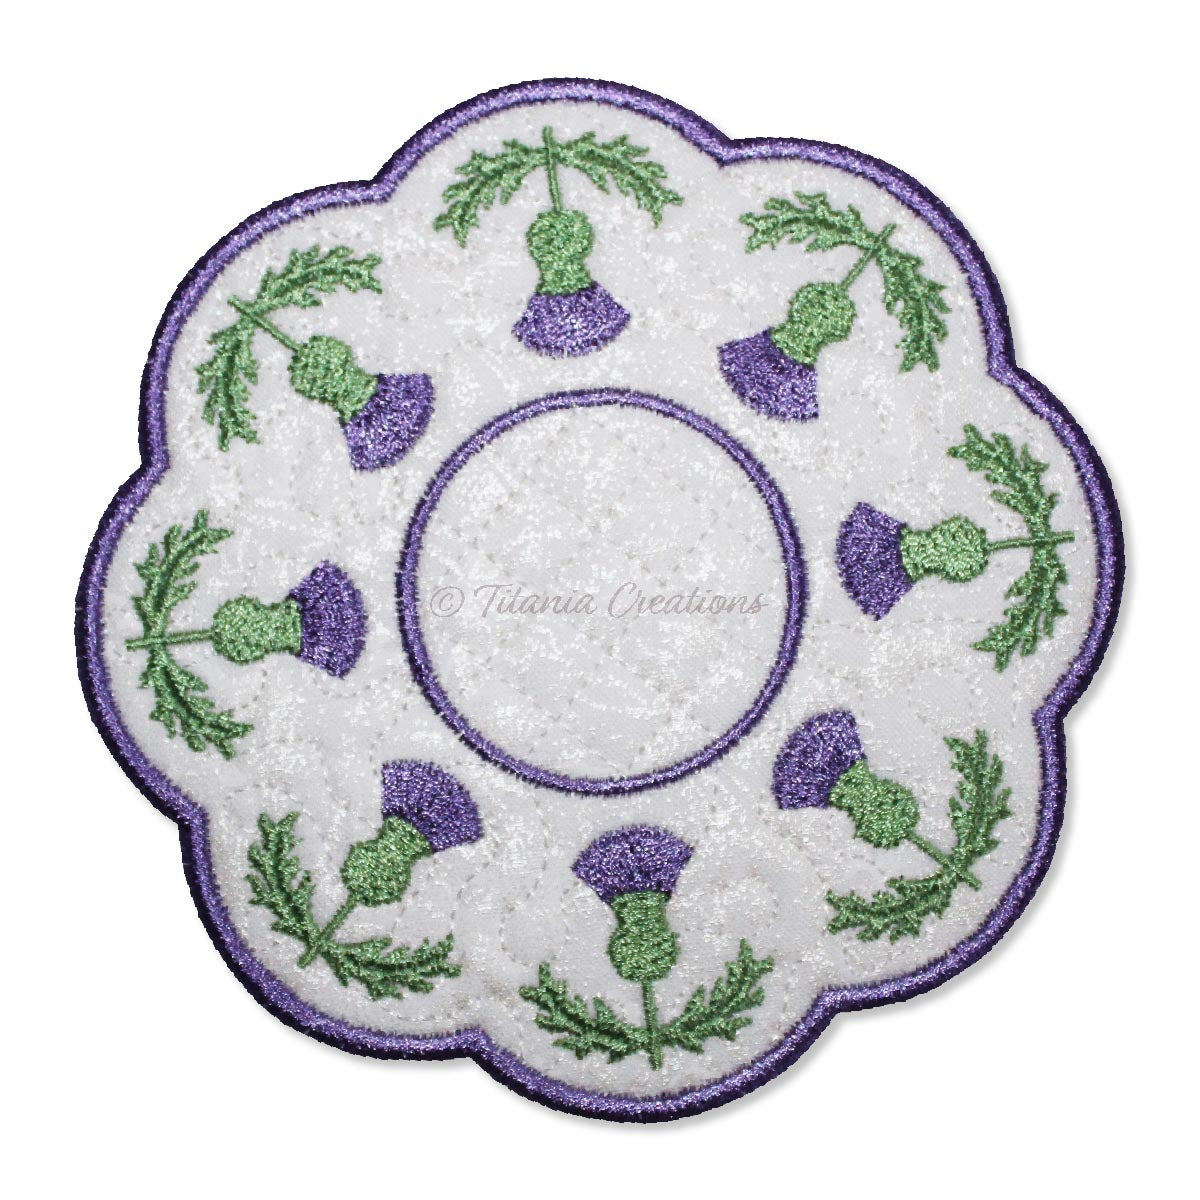 ITH Thistle Candle Mat 5x5 6x6 7x7 8x8